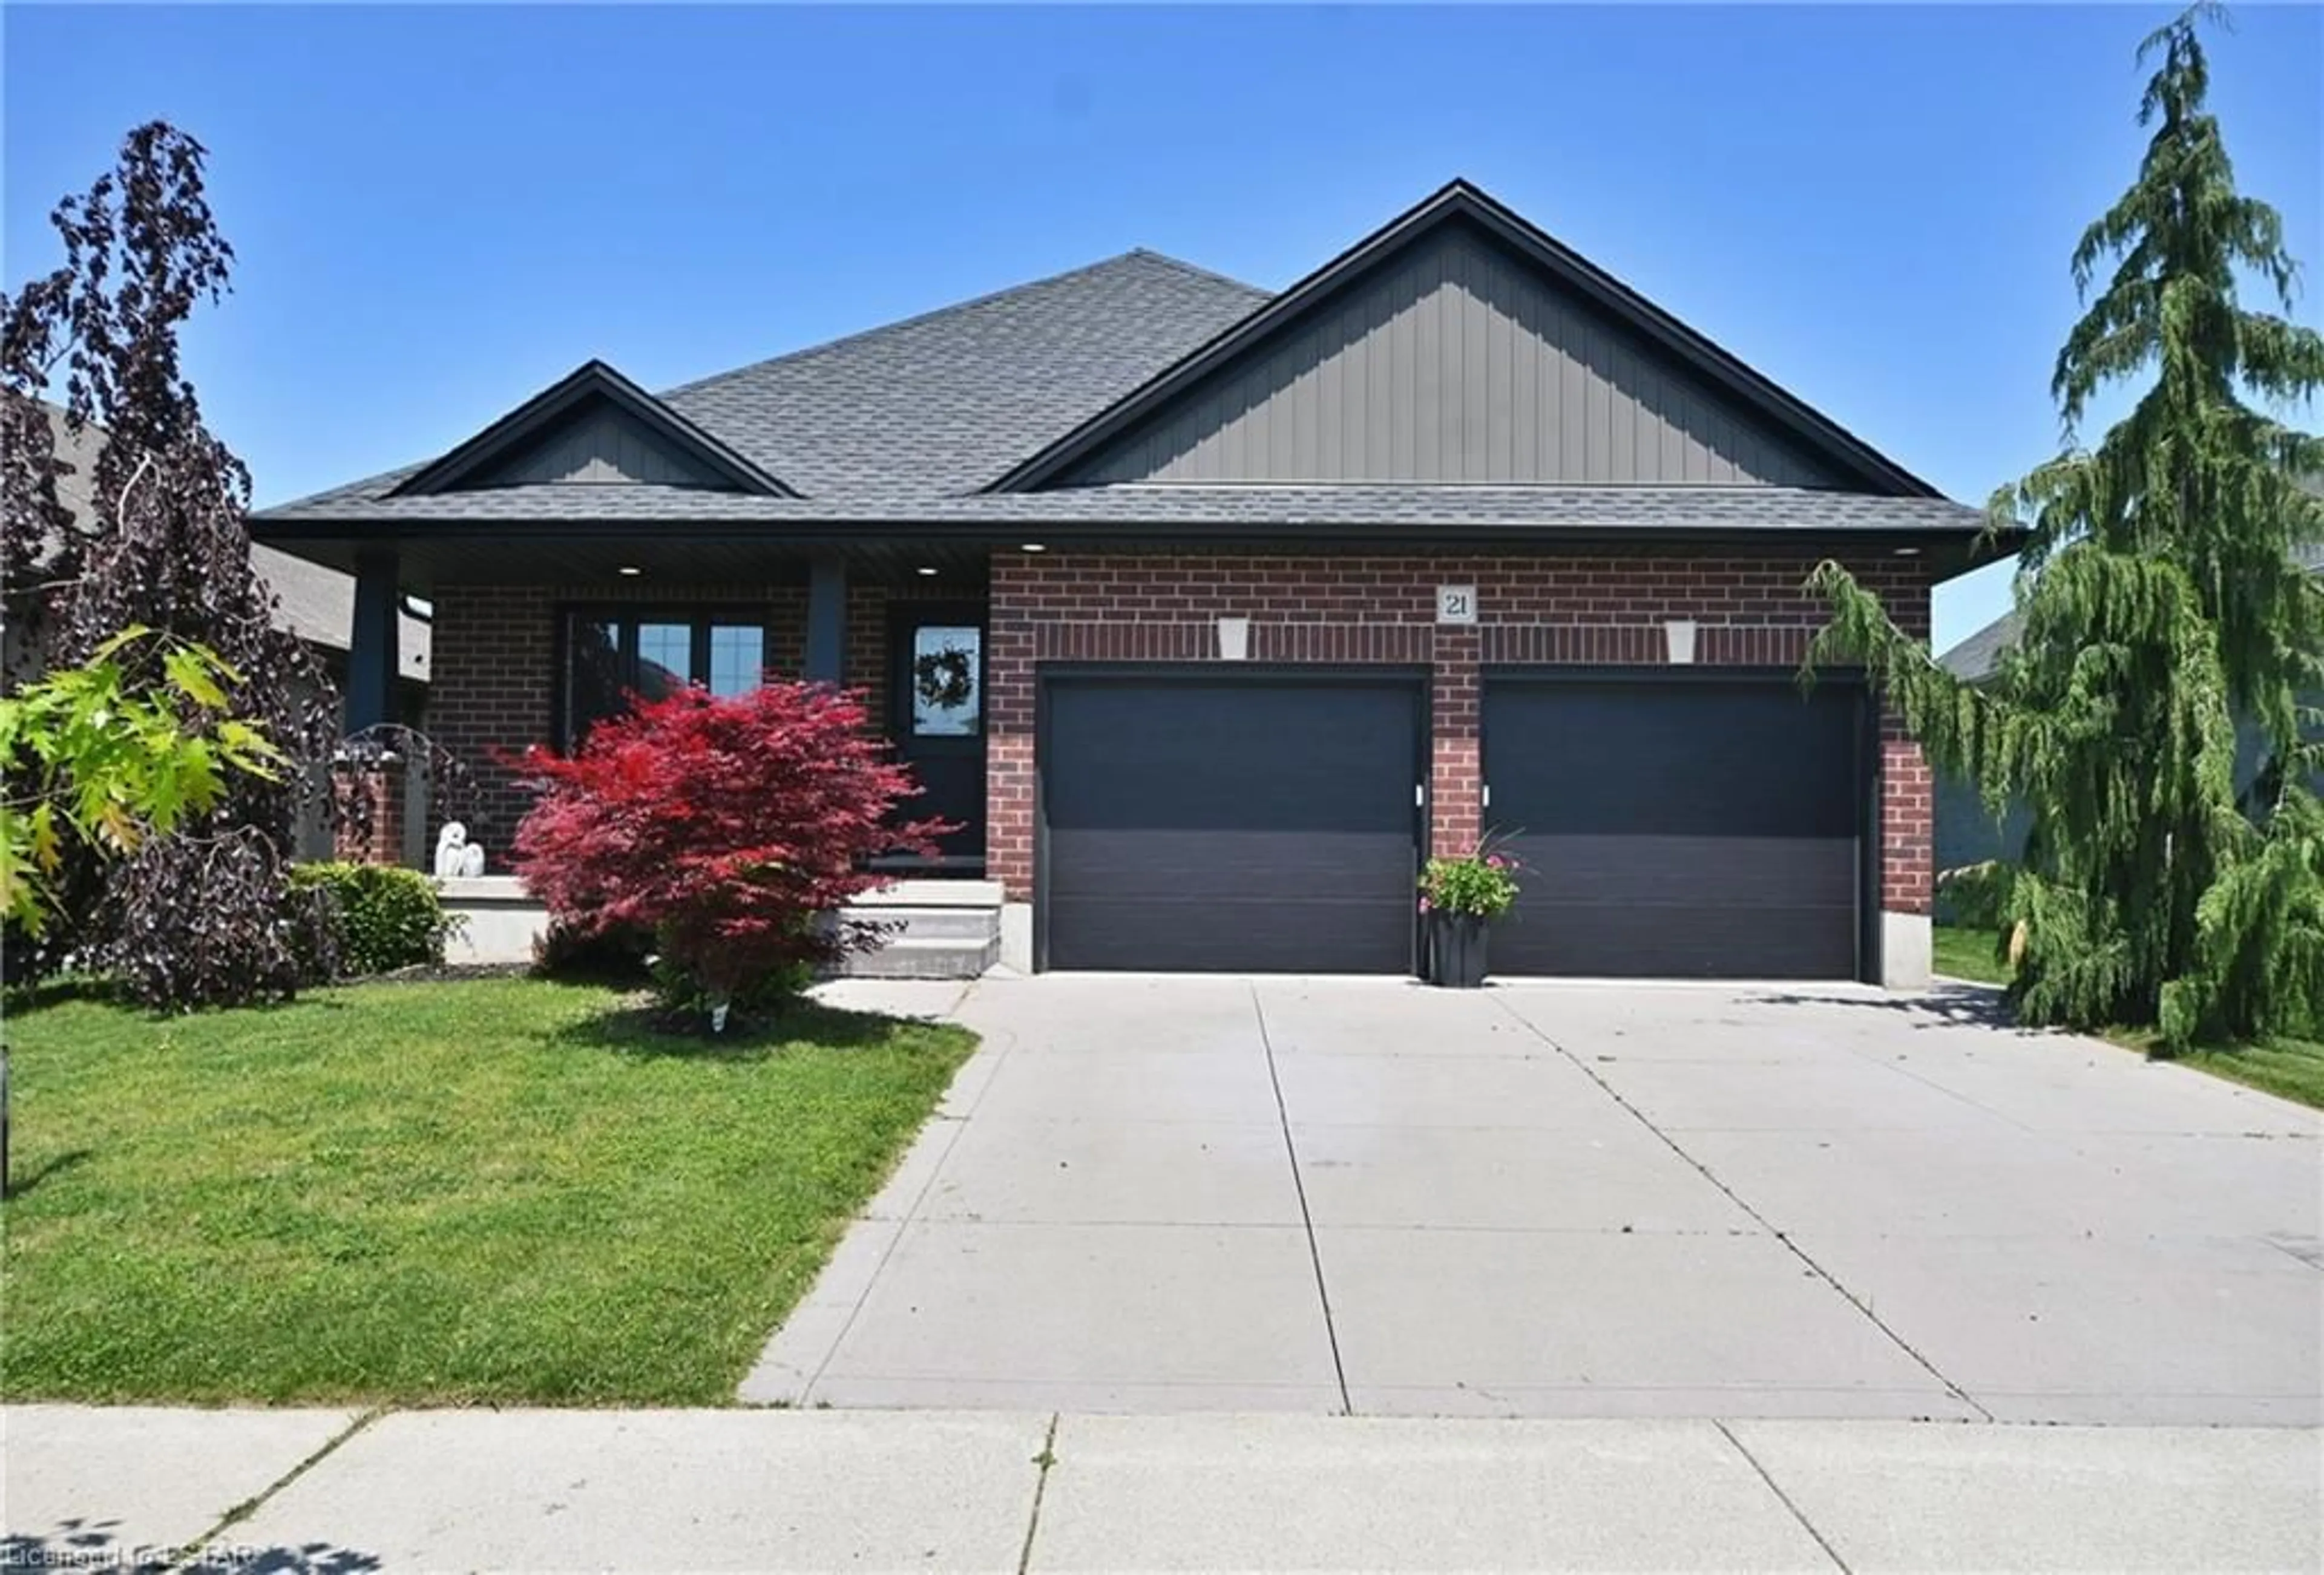 Home with brick exterior material for 21 Old Course Rd, St. Thomas Ontario N5R 6J9